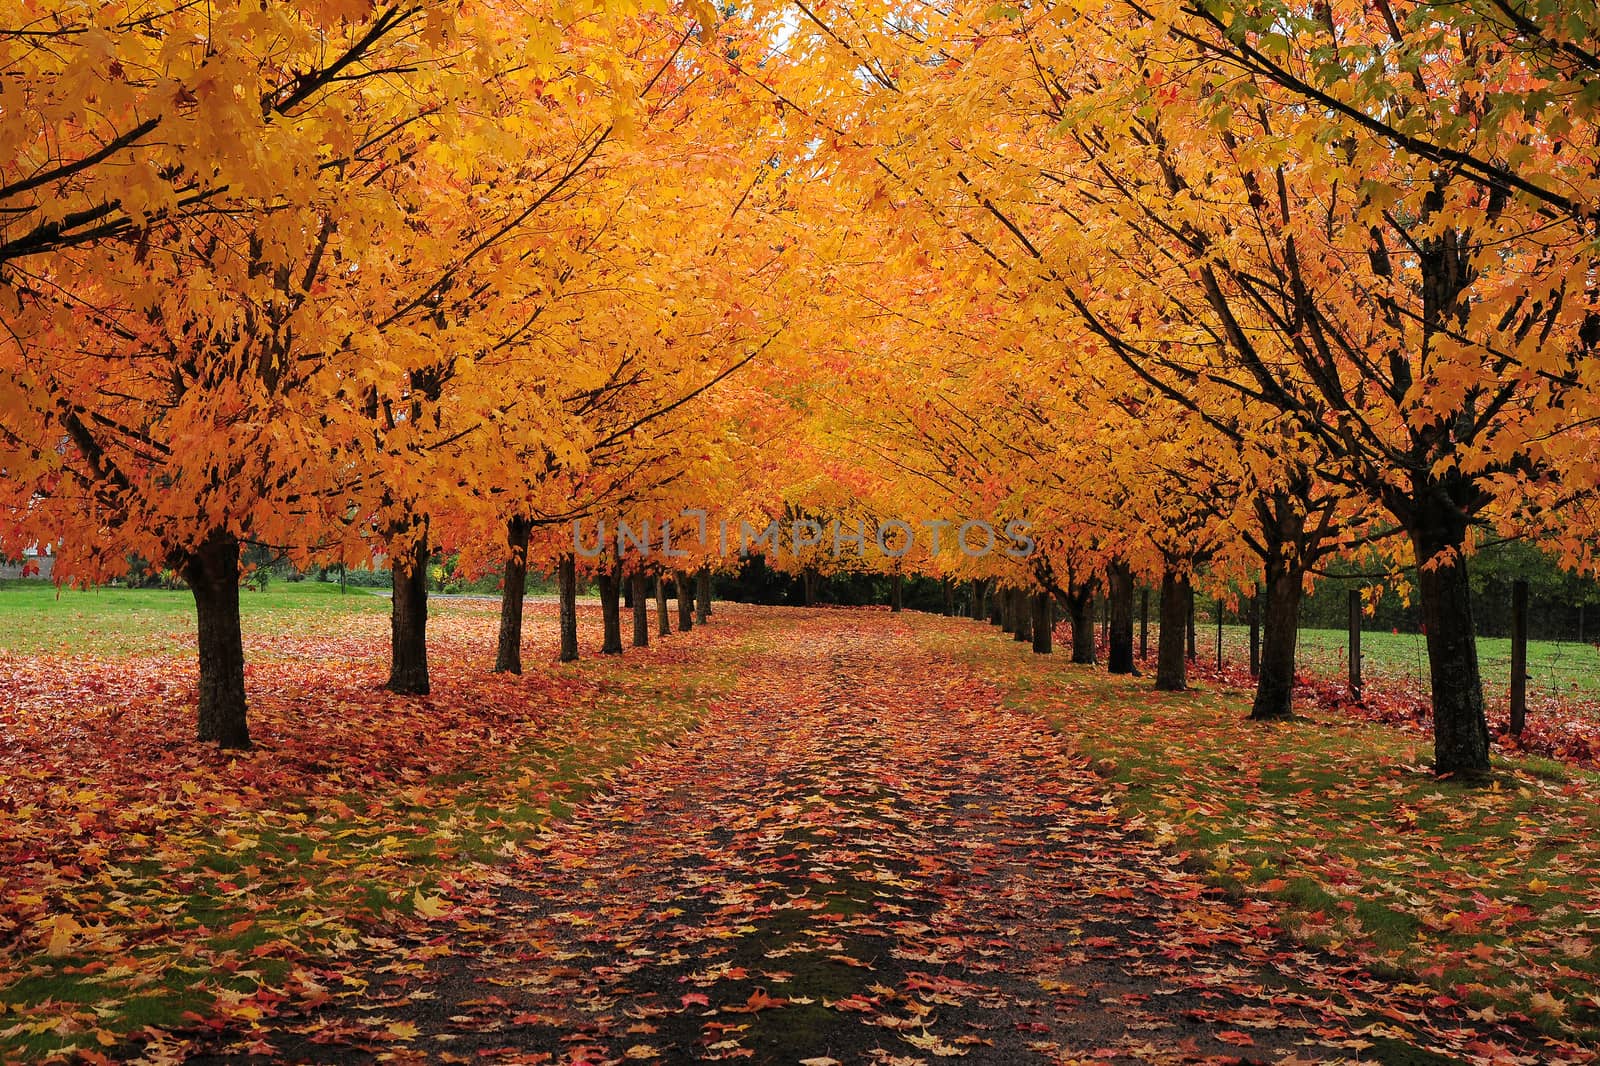 a local drive way with maple trees in autumn